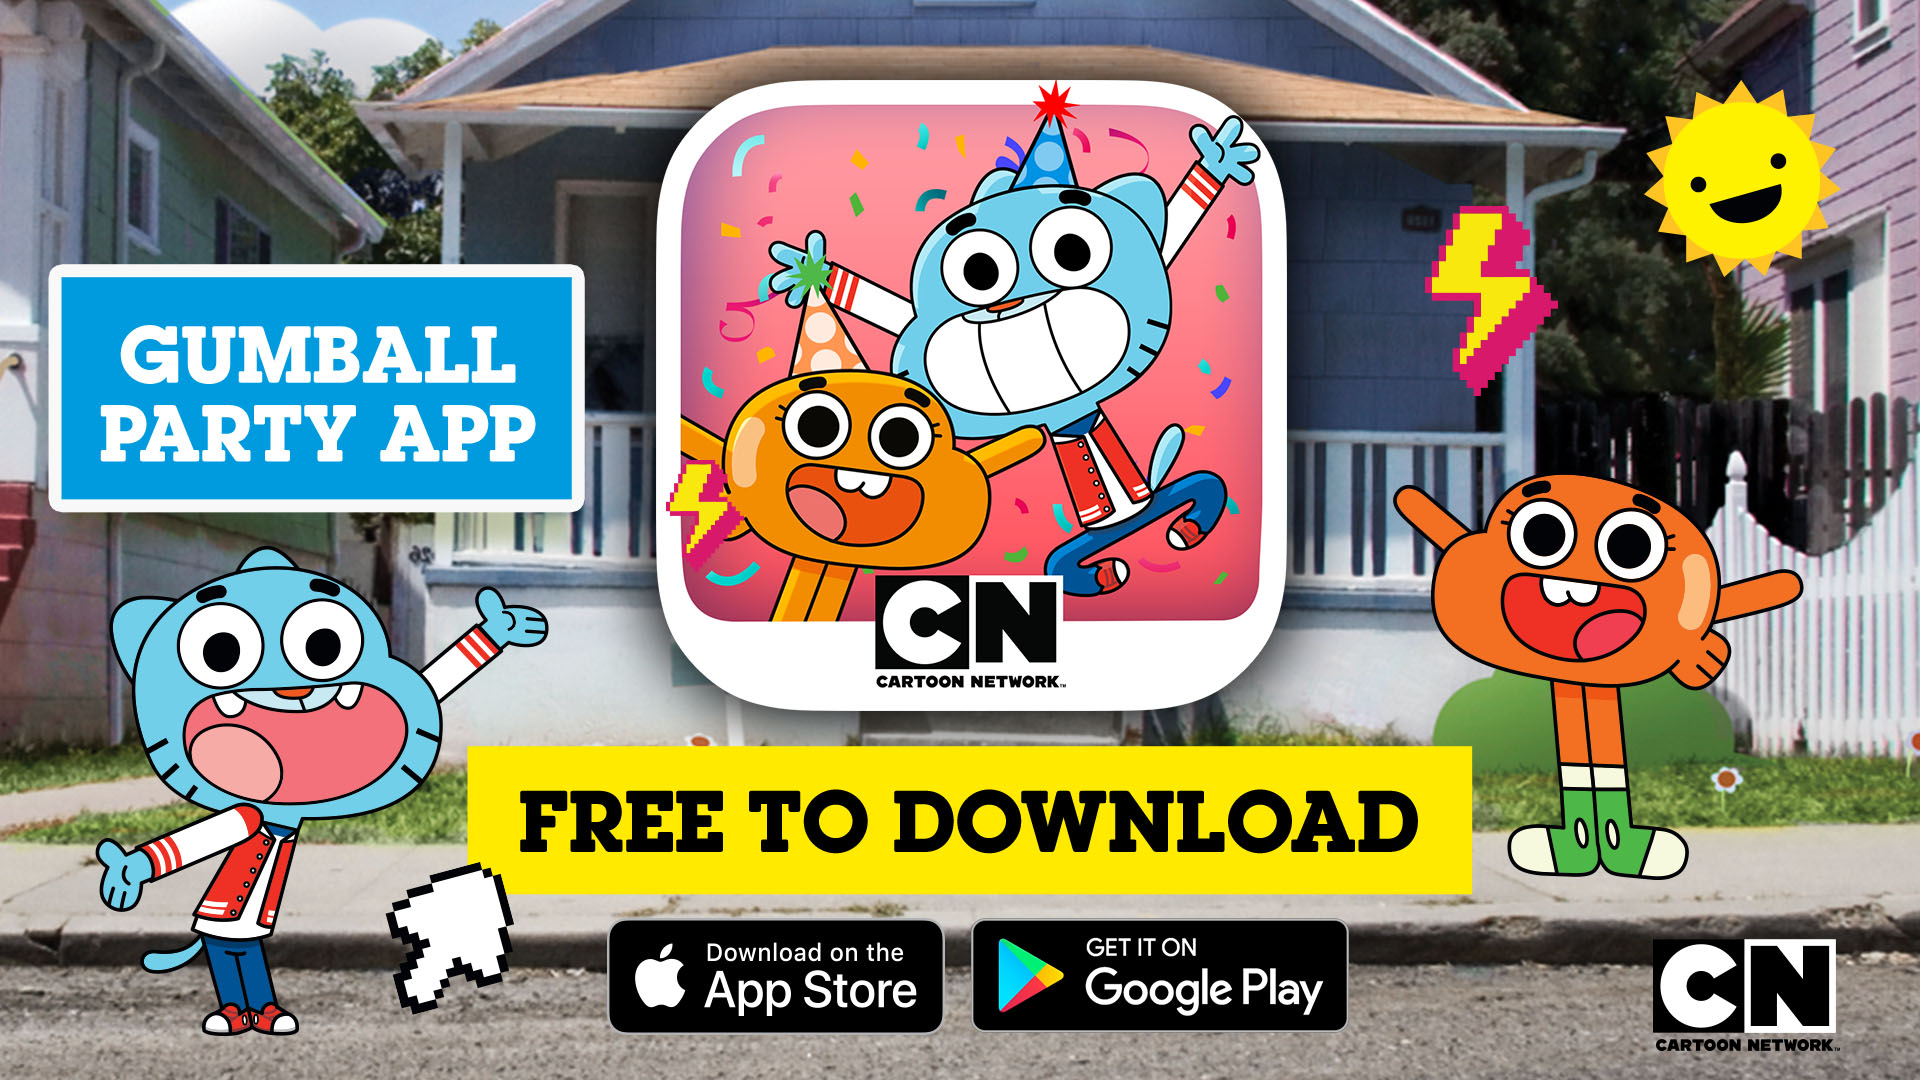 The Amazing World of Gumball - THE GUMBALL GAMES (Cartoon Network